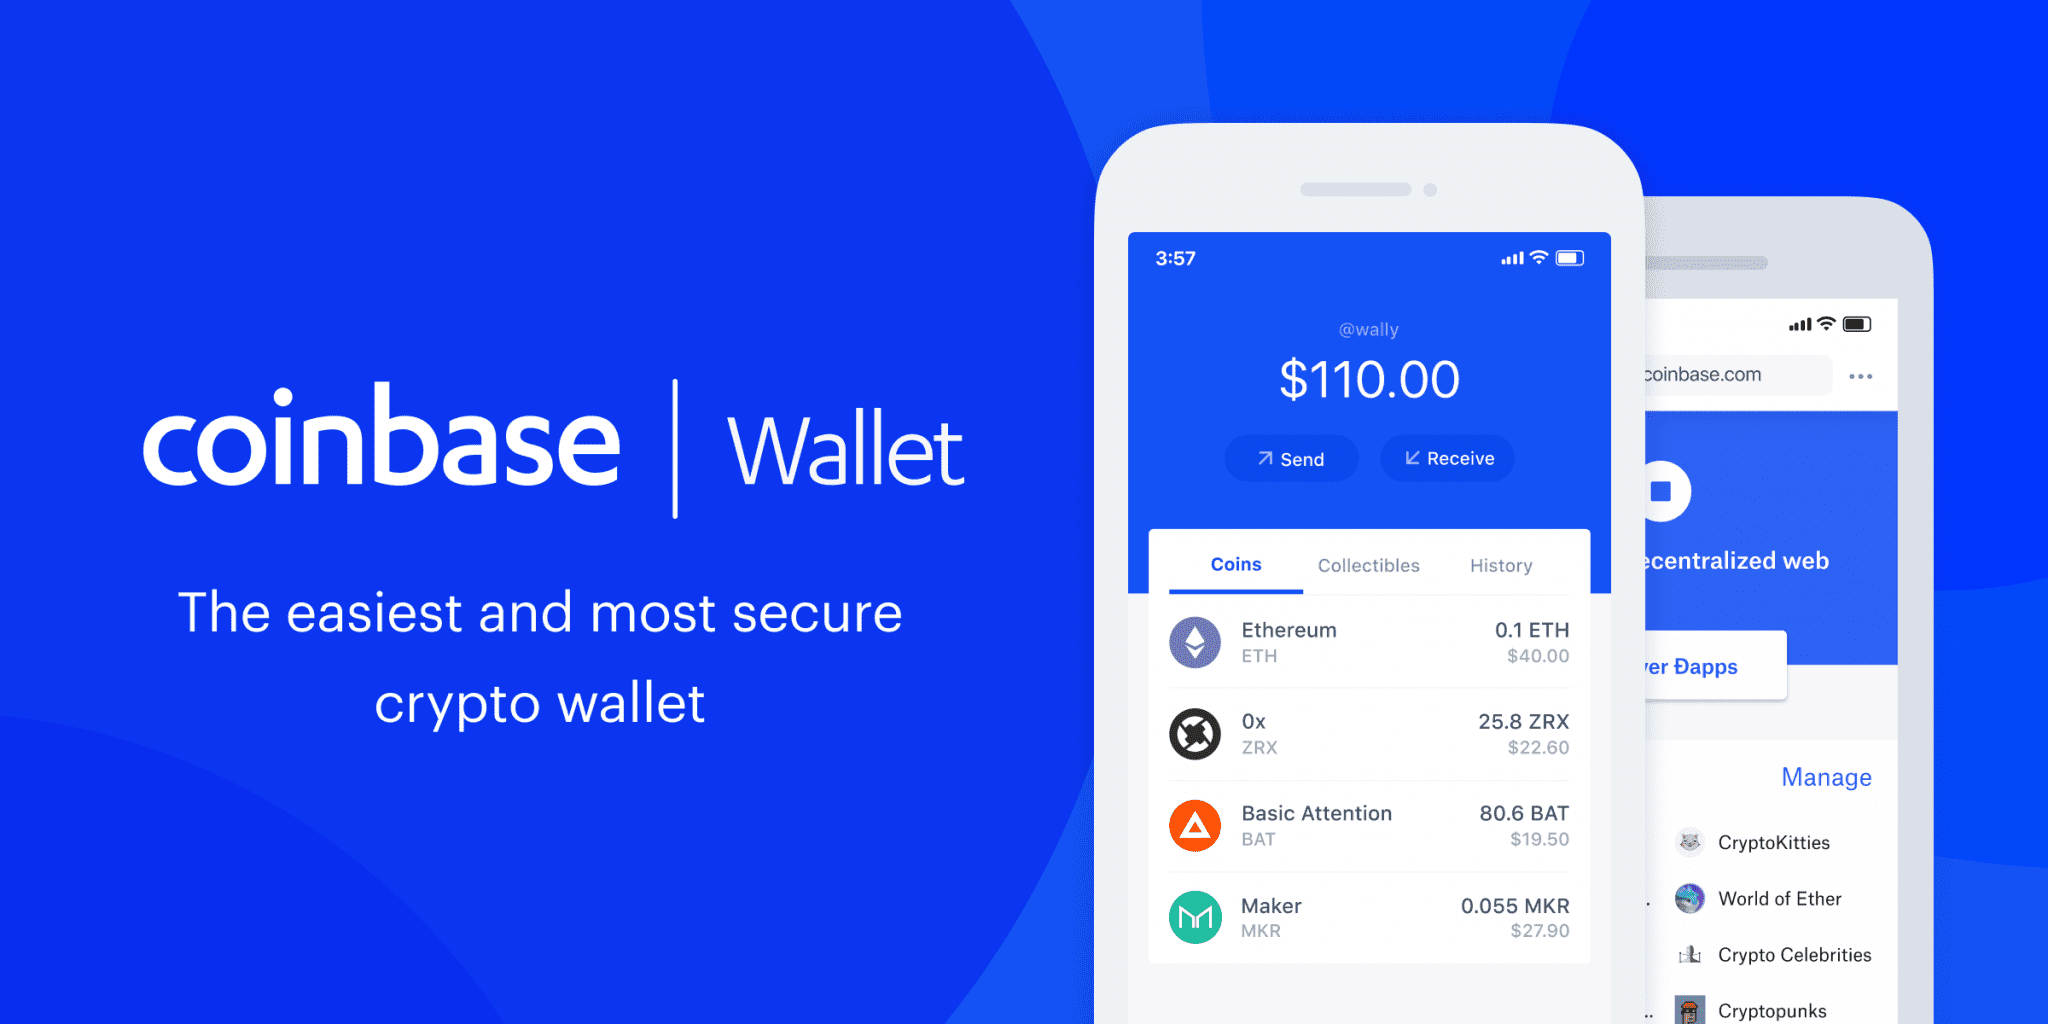 coinbase what is my wallet address